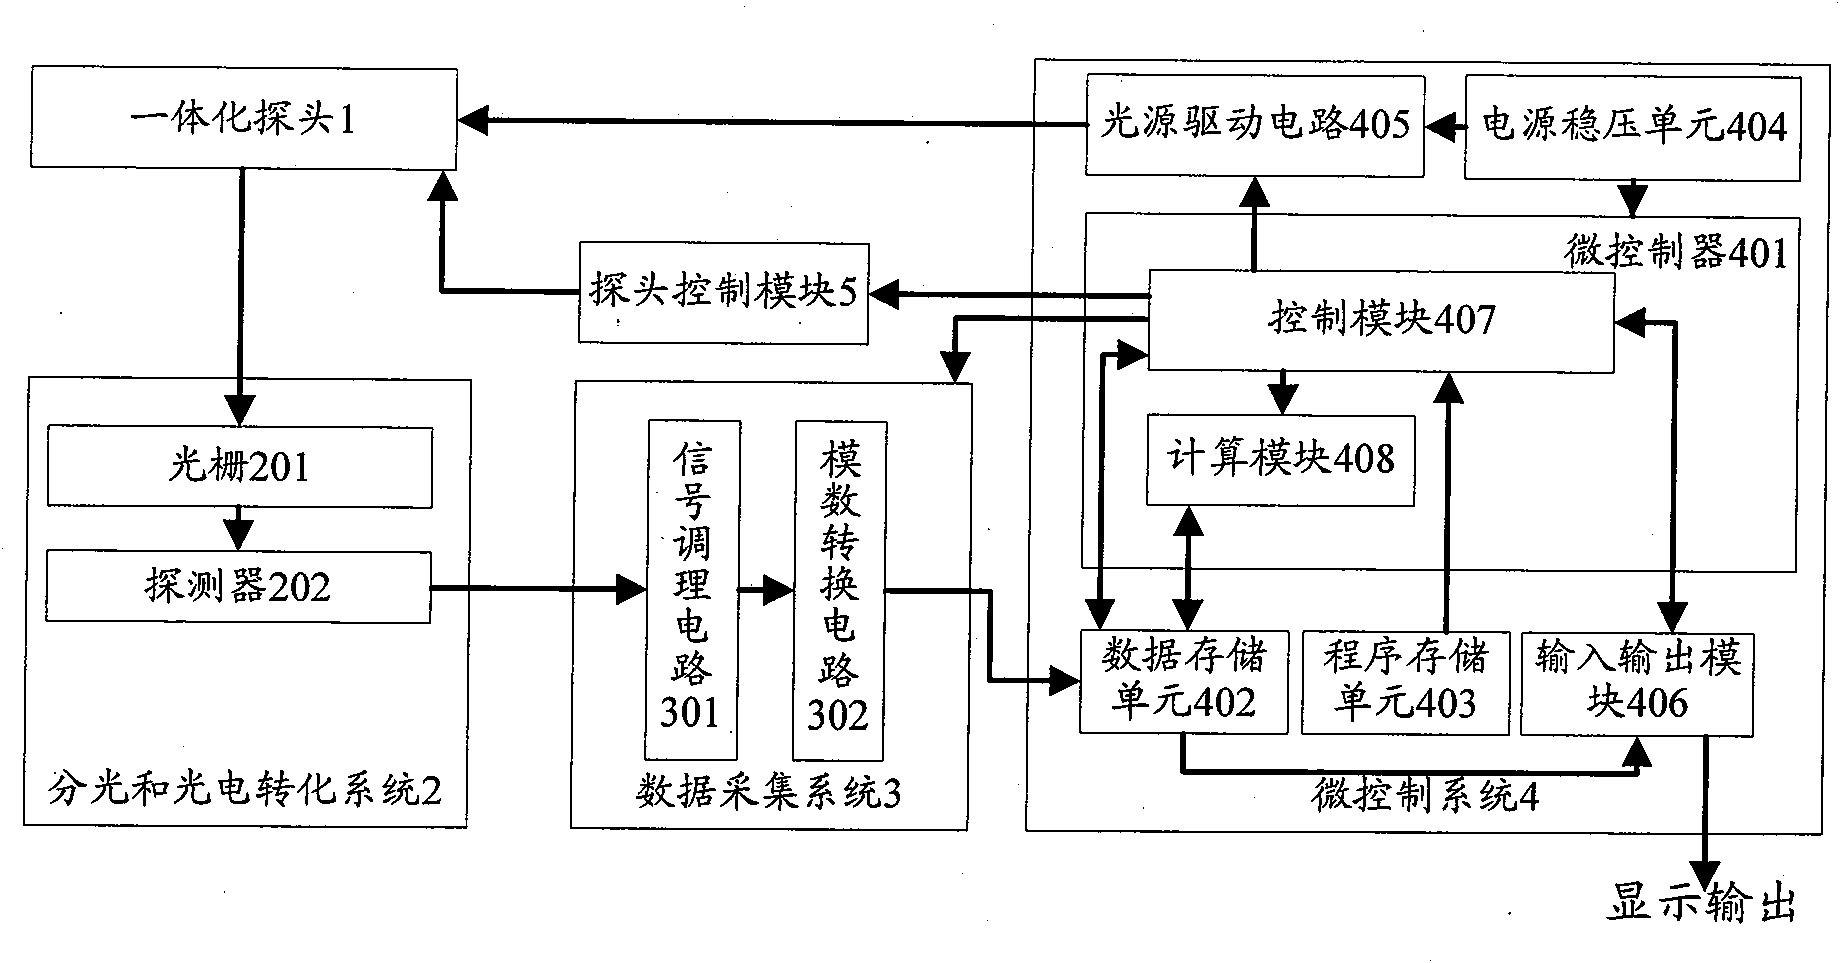 Advanced plant biochemical parameter non-contact monitoring device